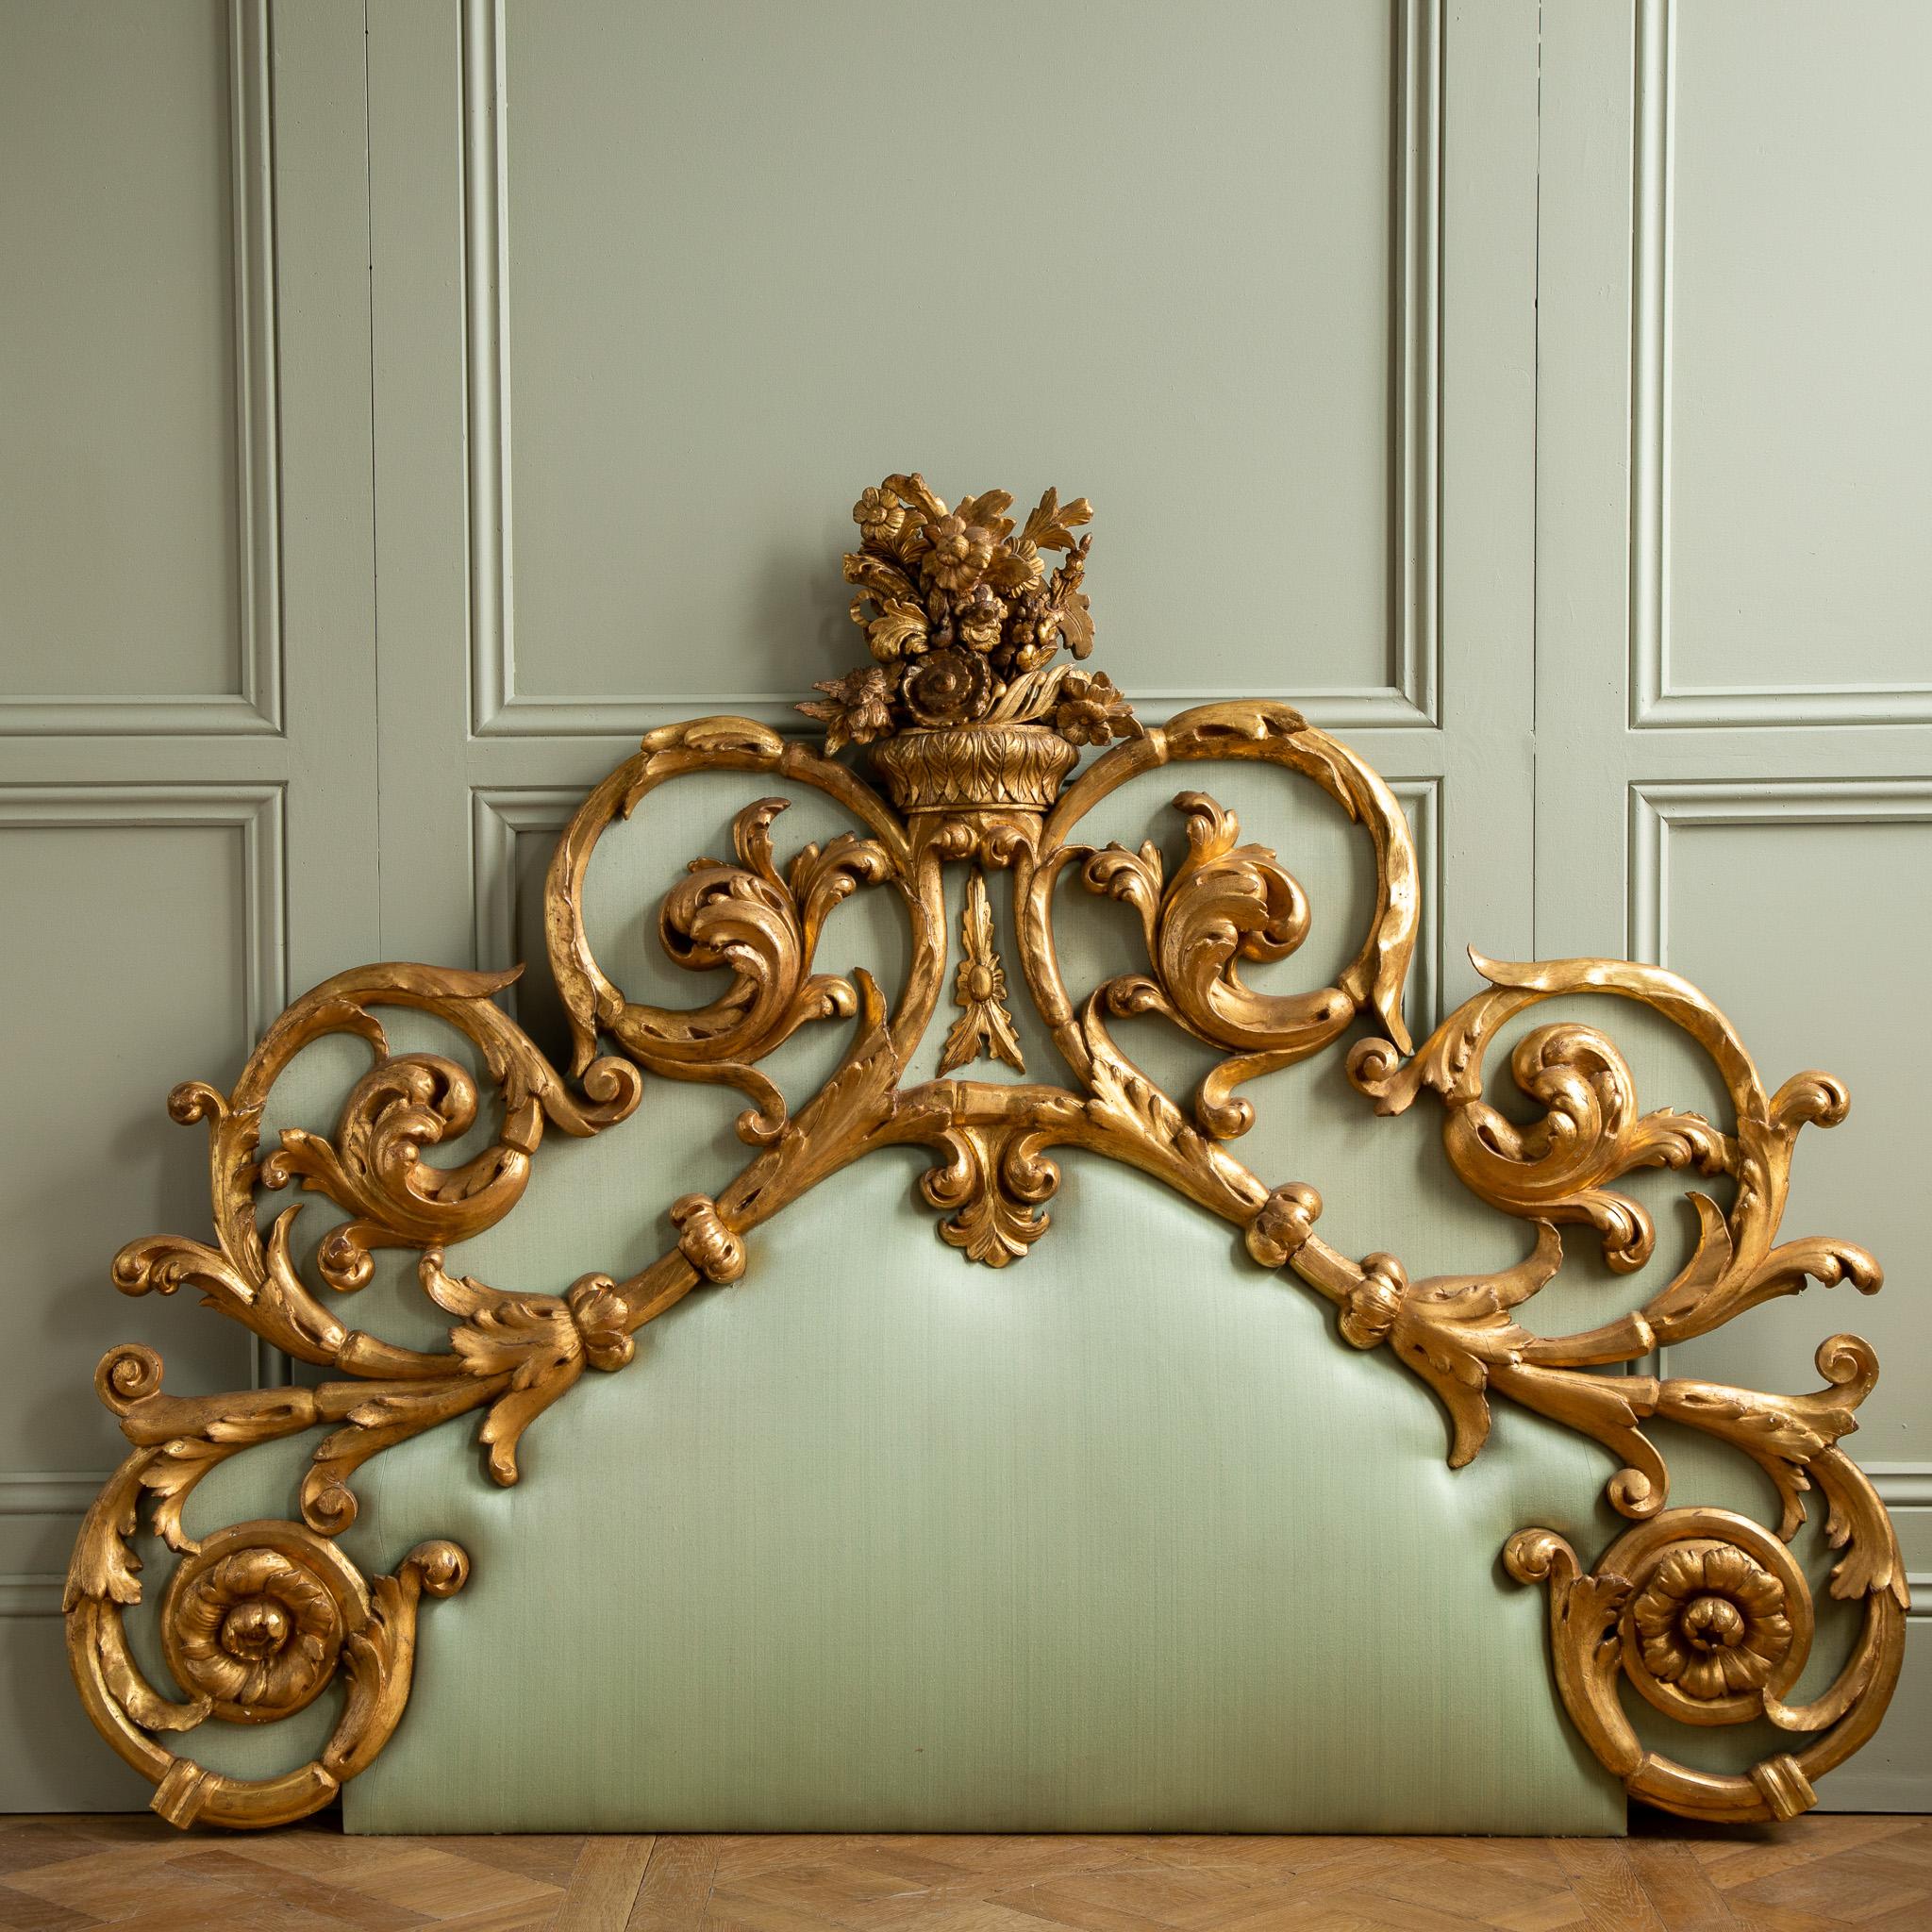 Hand-Carved Large 19th Century Gilt wood Hand Carved Venetian Headboard In Rococo Style